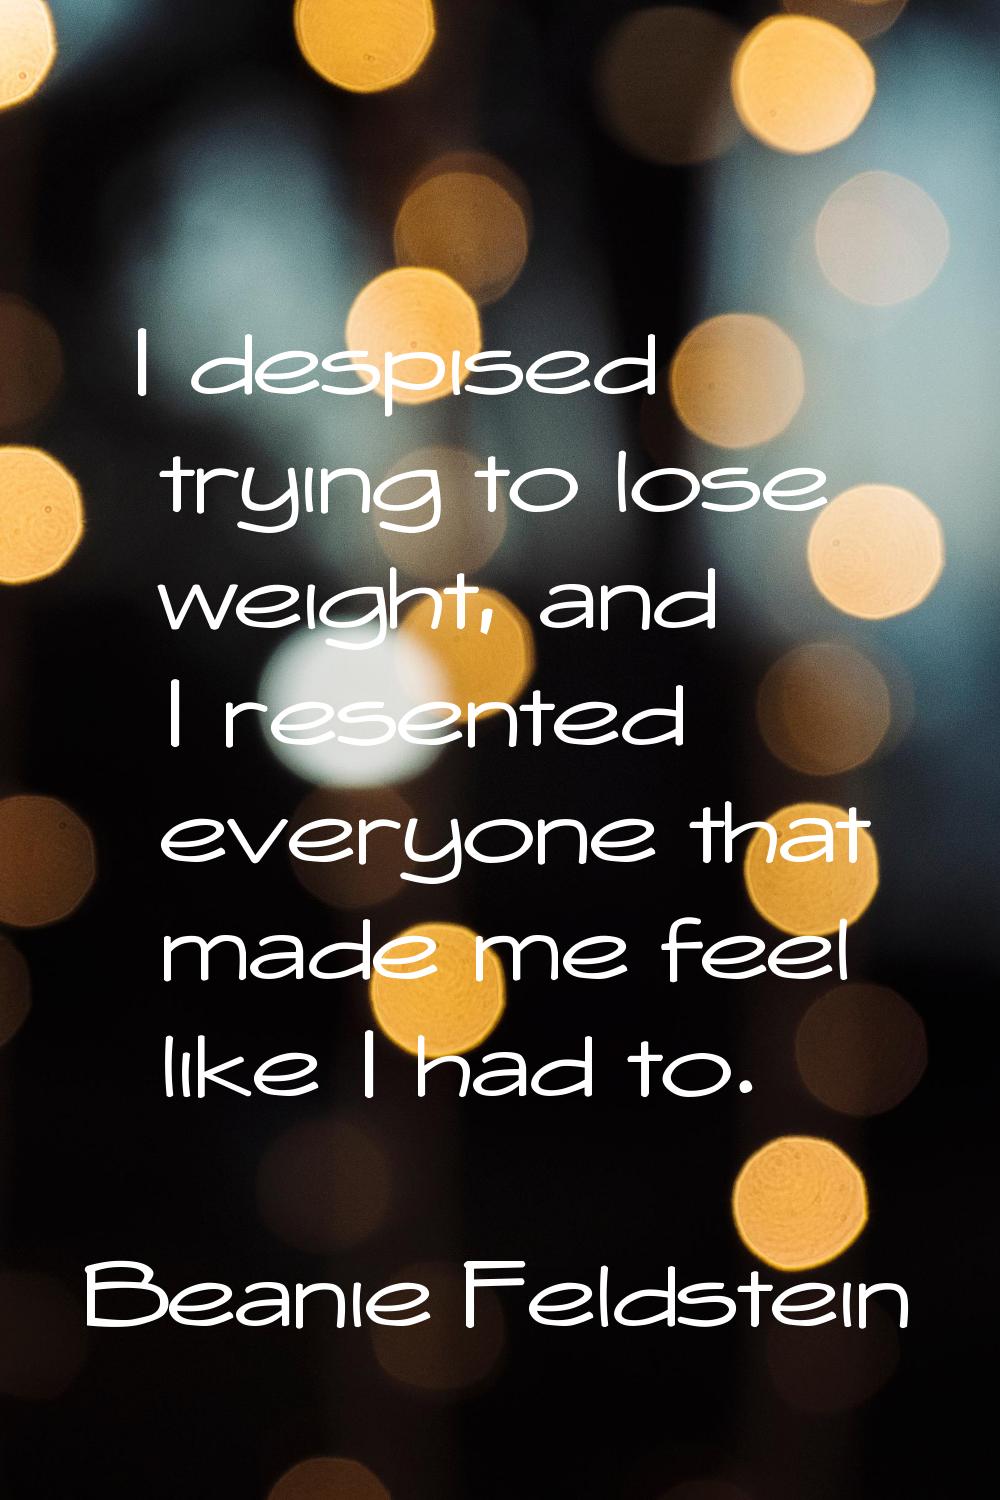 I despised trying to lose weight, and I resented everyone that made me feel like I had to.